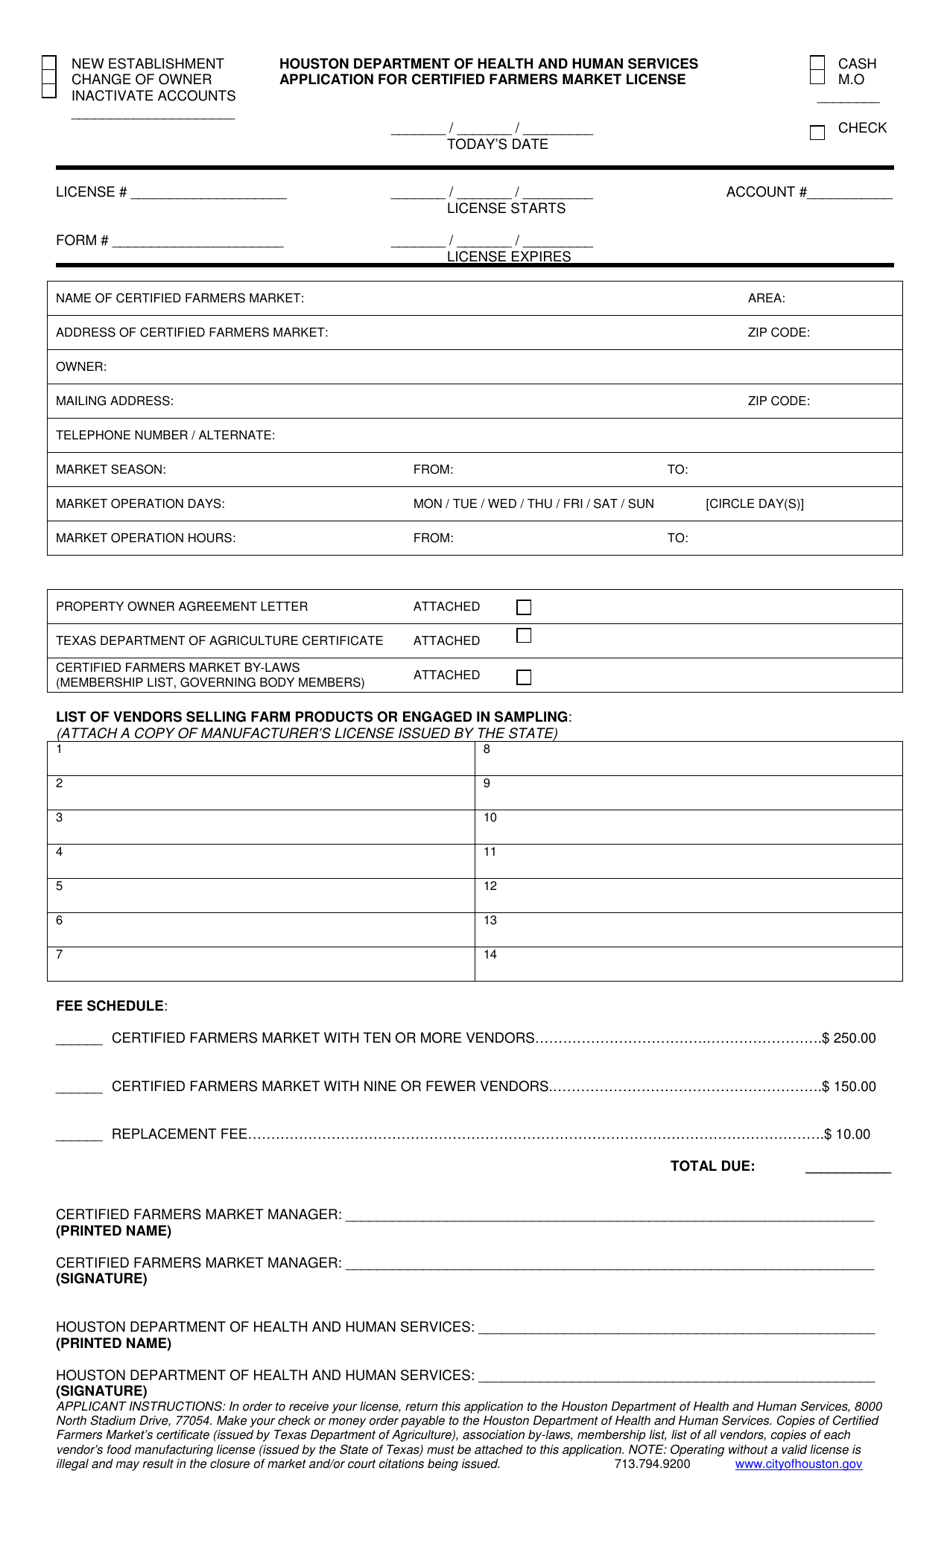 Application for Certified Farmers Market License - City of Houston, Texas, Page 1